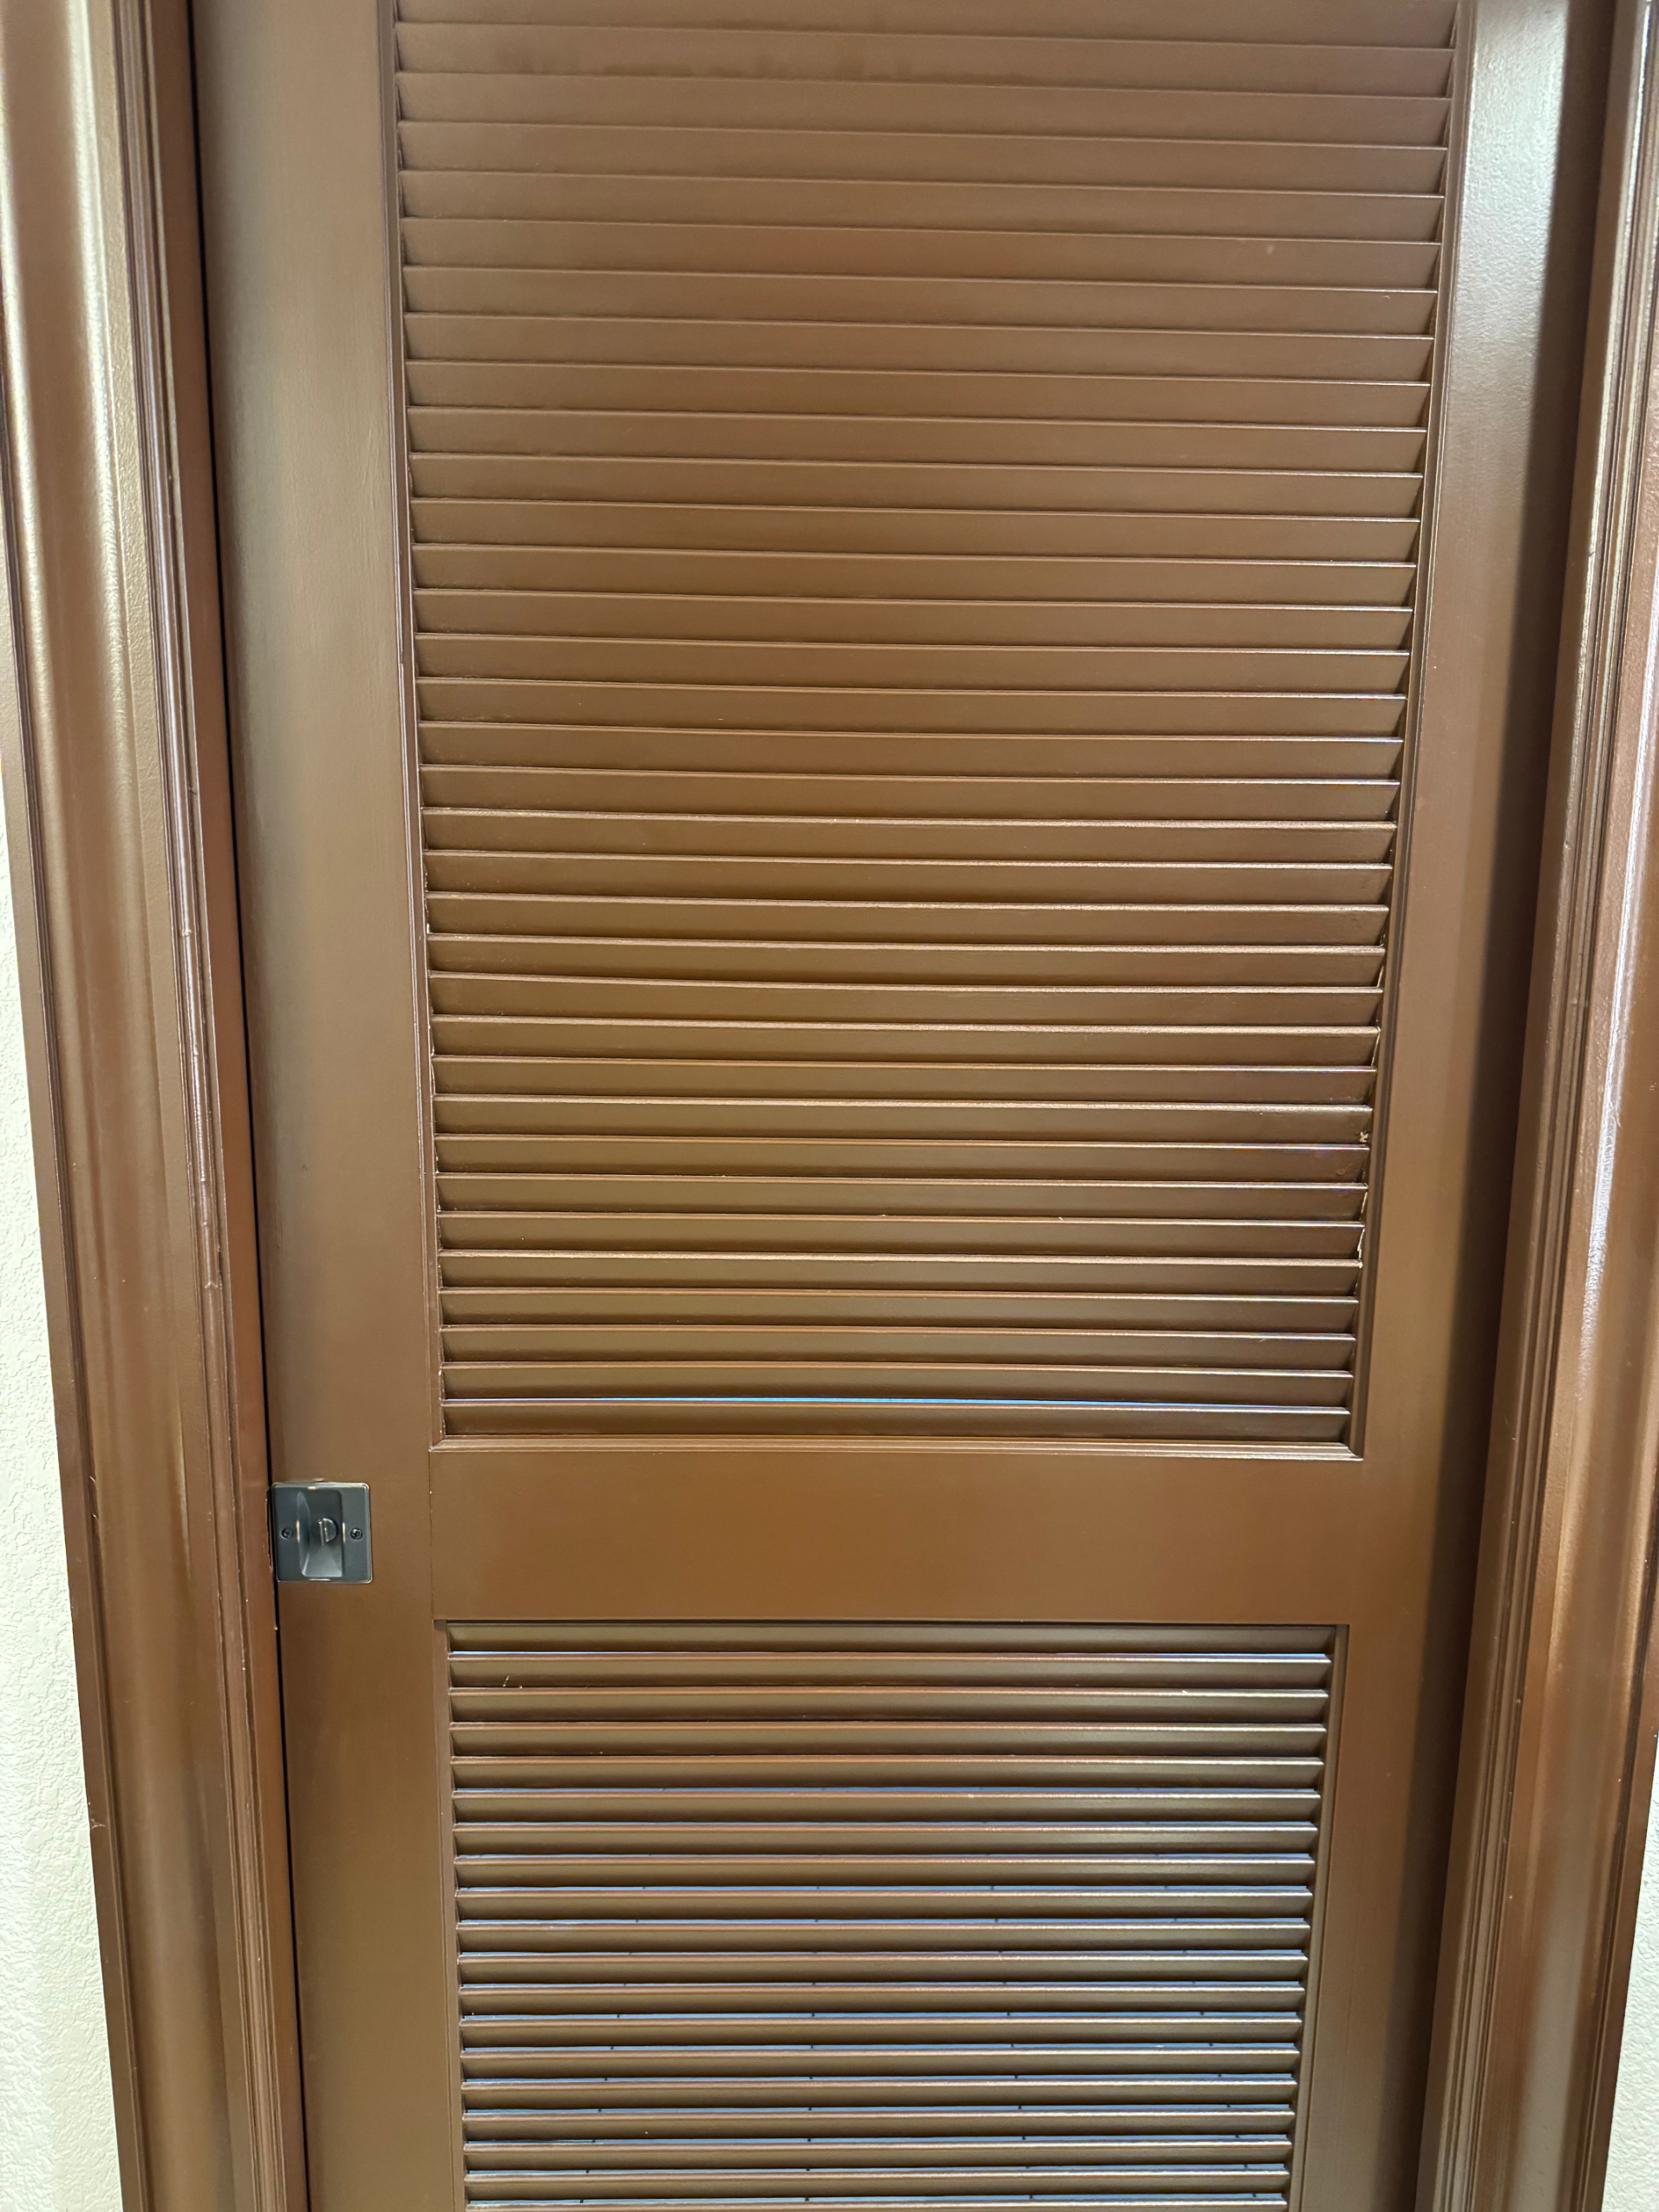 Brown door with horizontal slats, part of a building&#x27;s interior architecture